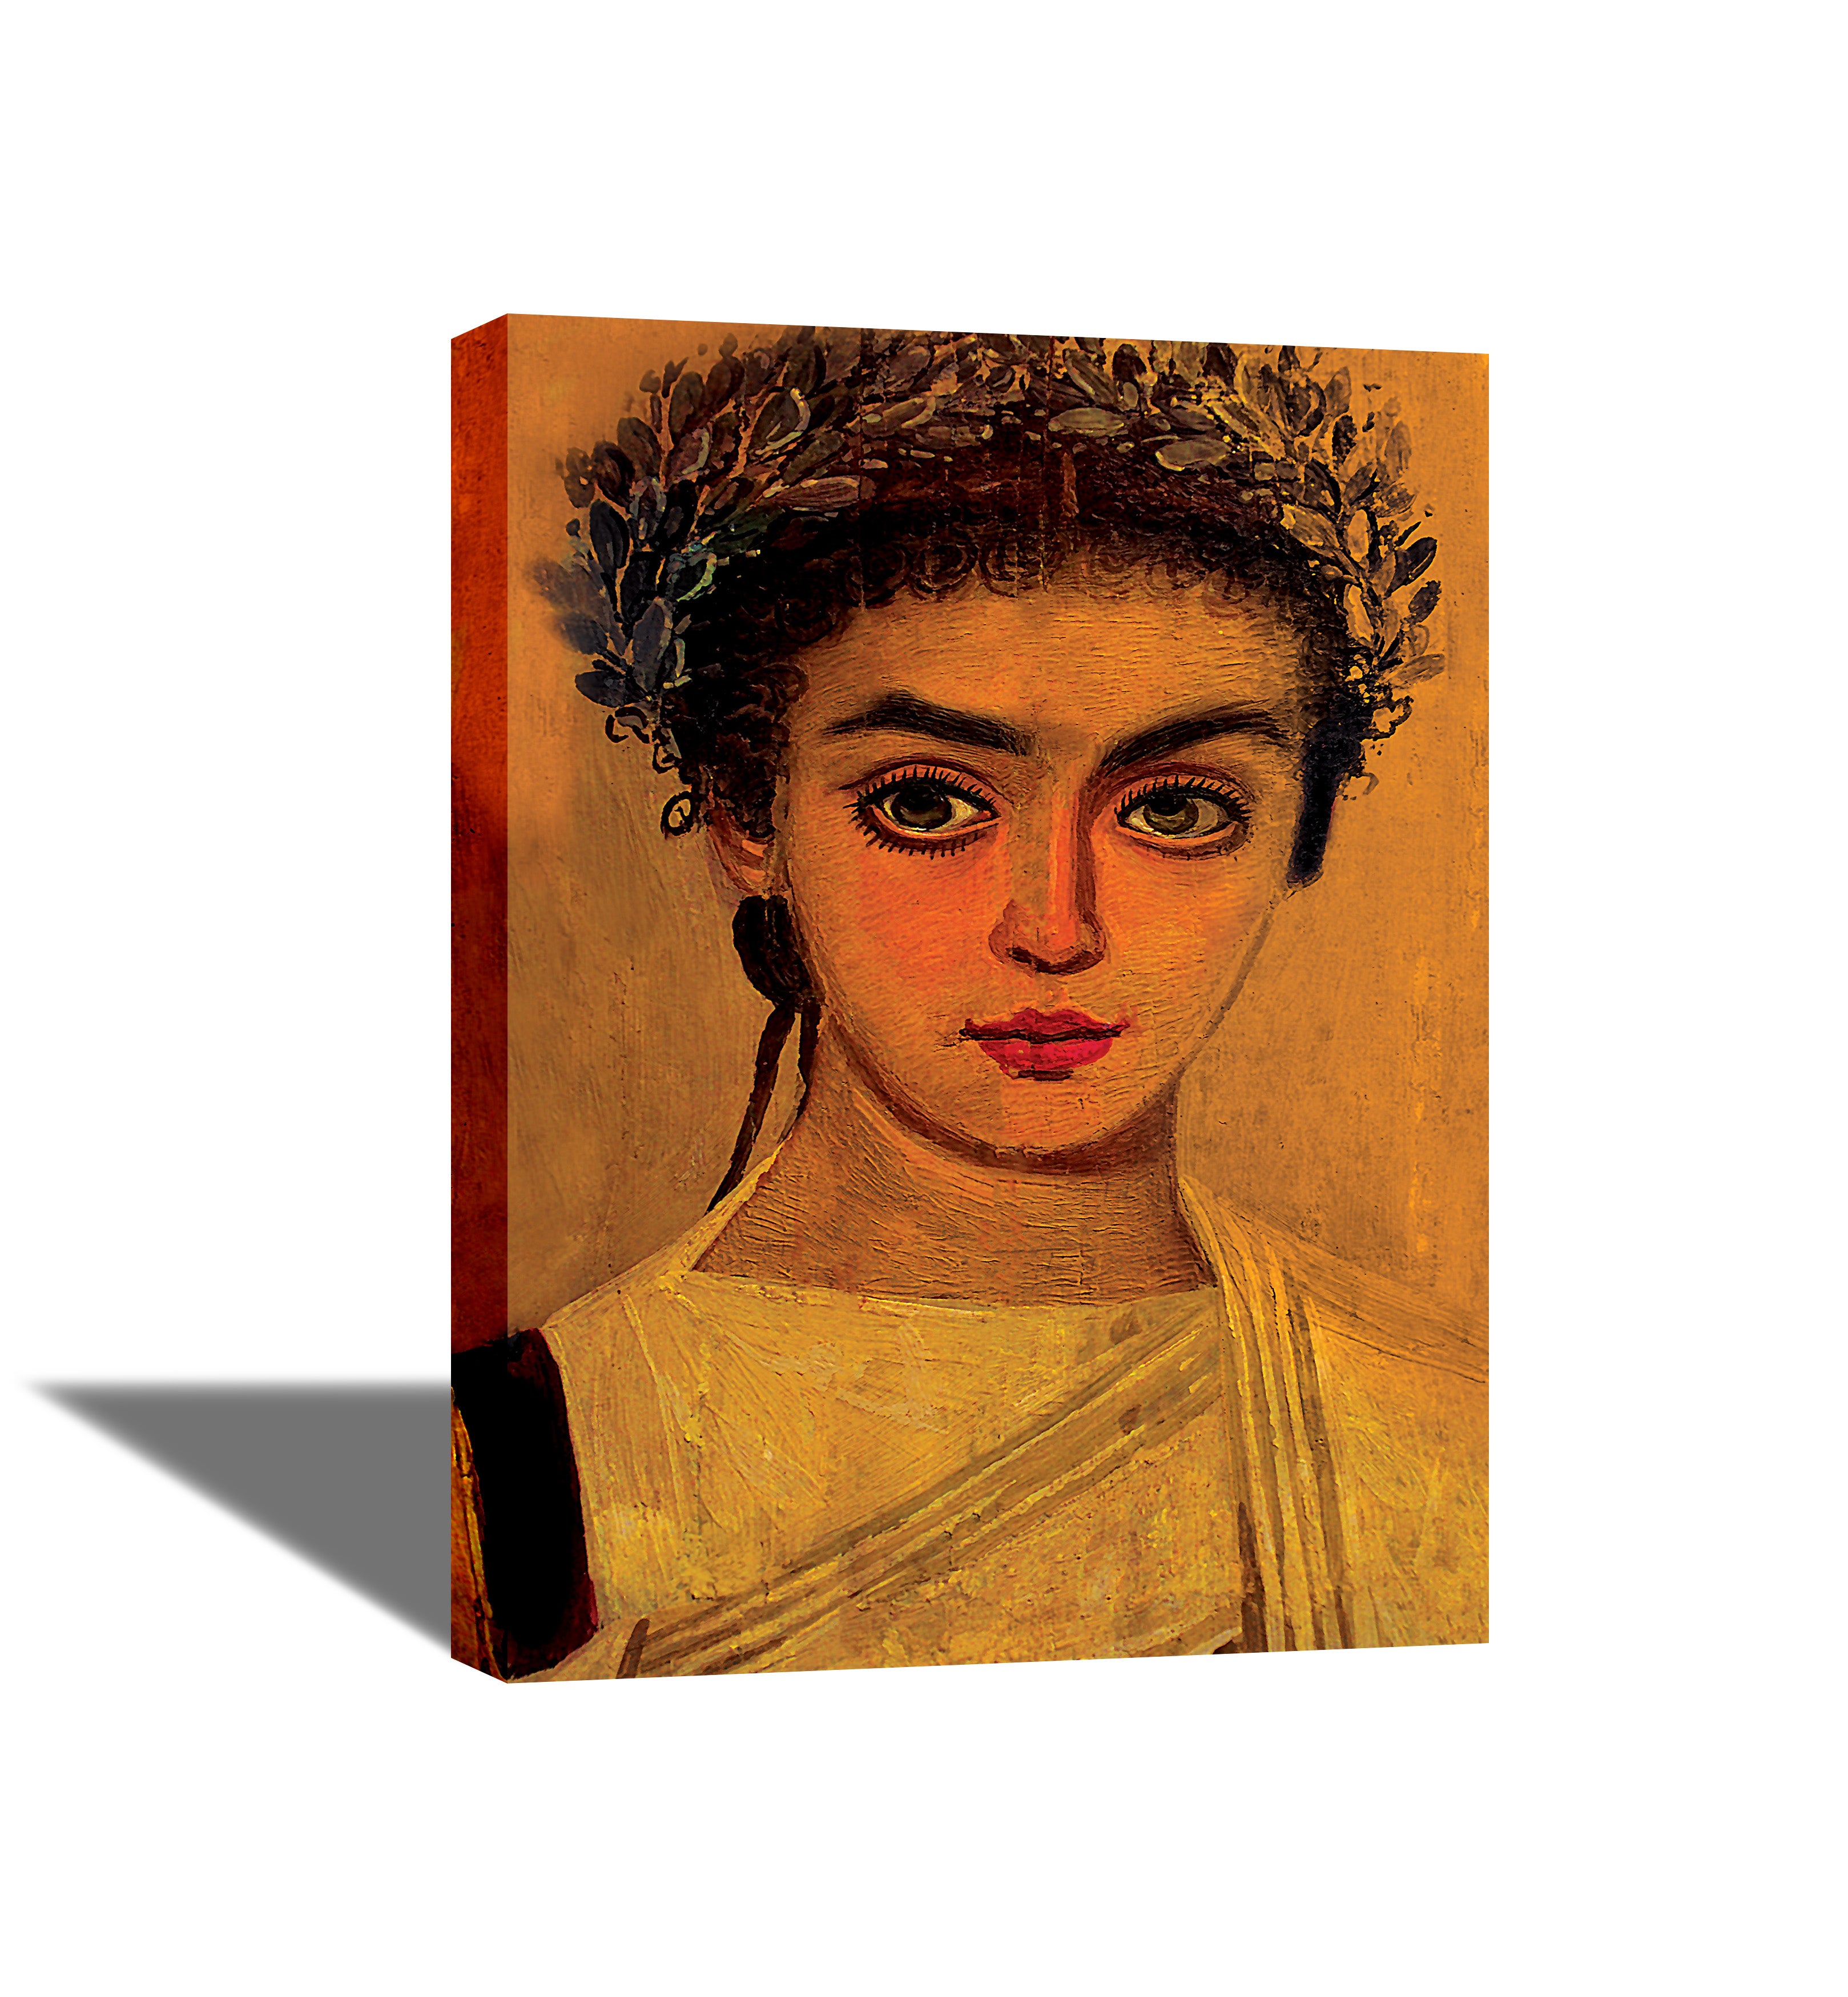 Portraits from Ancient Egypt